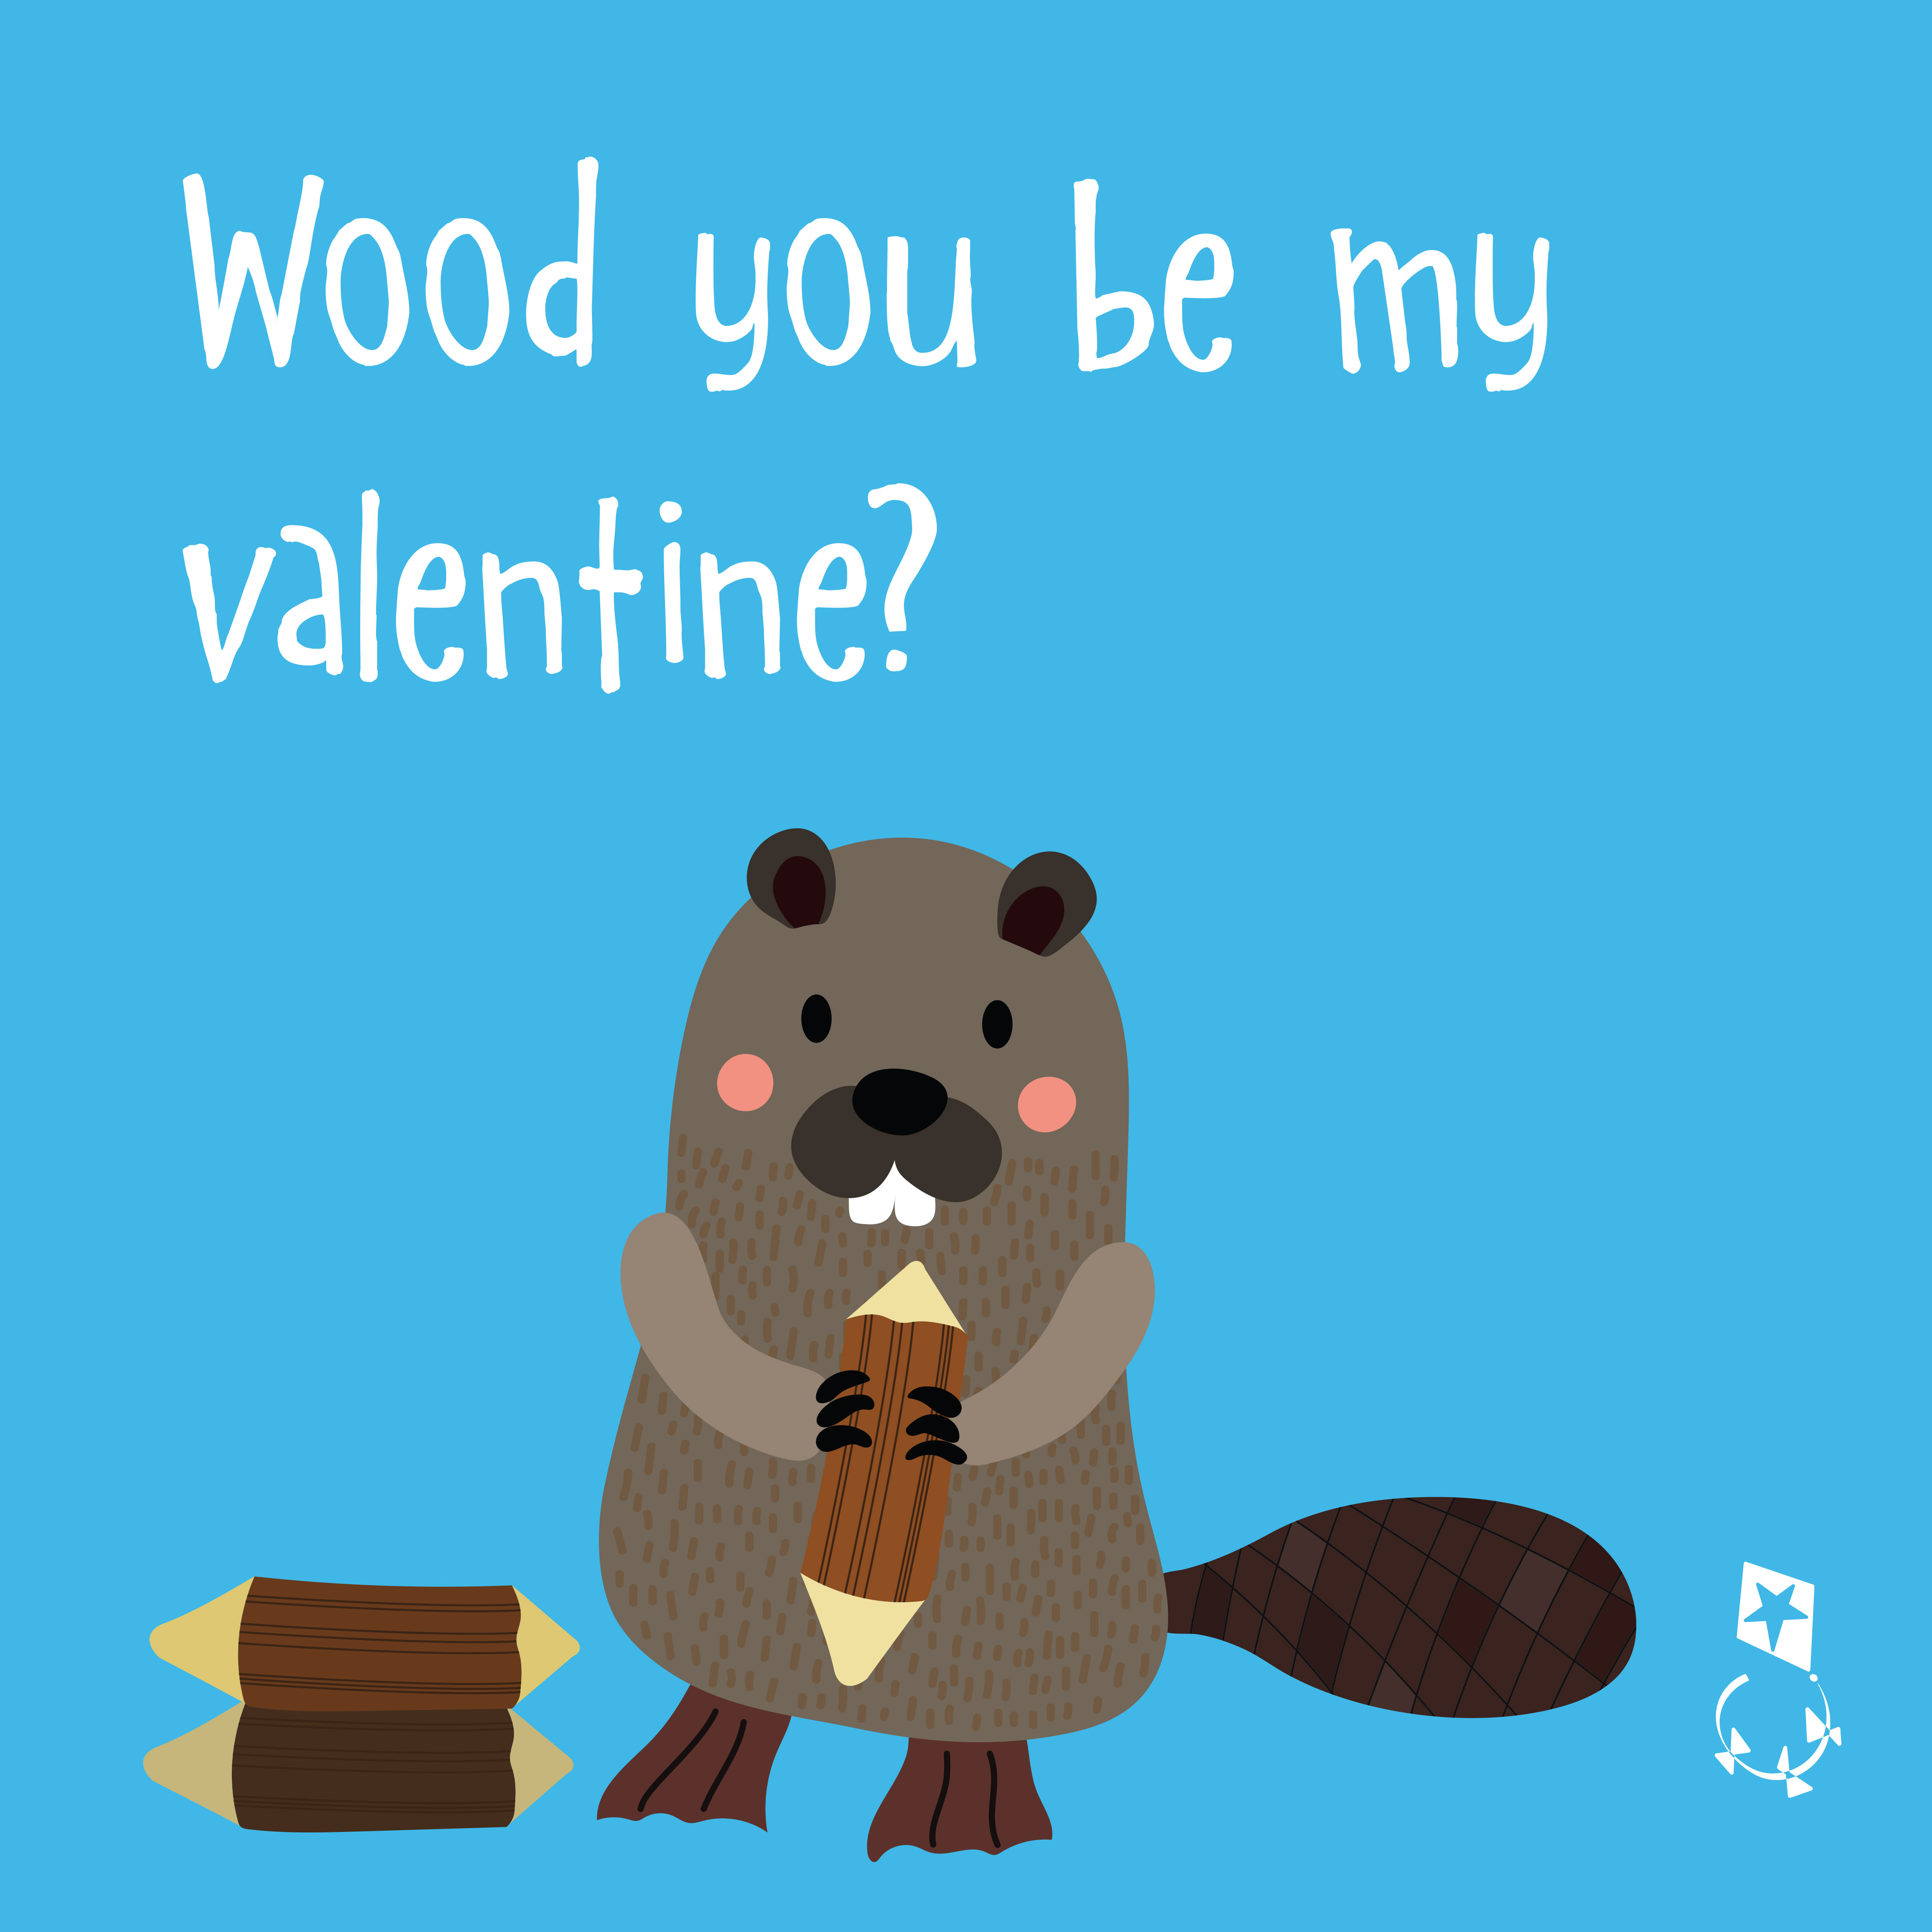 Wood you be my valentine? Valentine's Day card